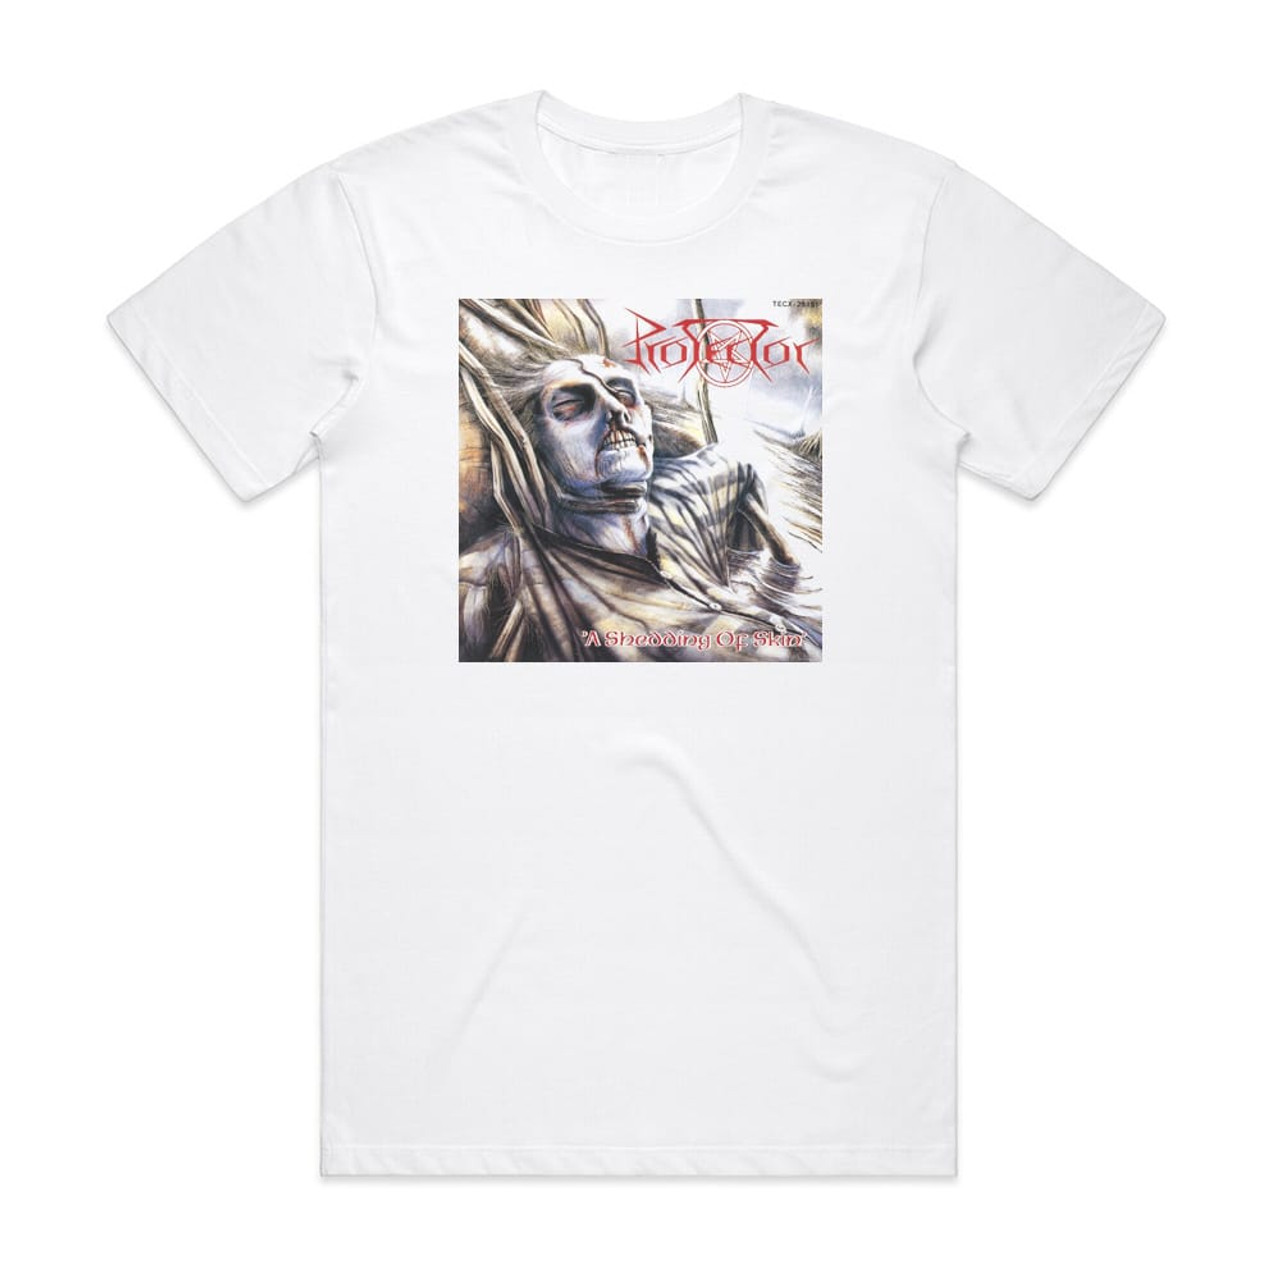 Protector A Shedding Of Skin Album Cover T-Shirt White